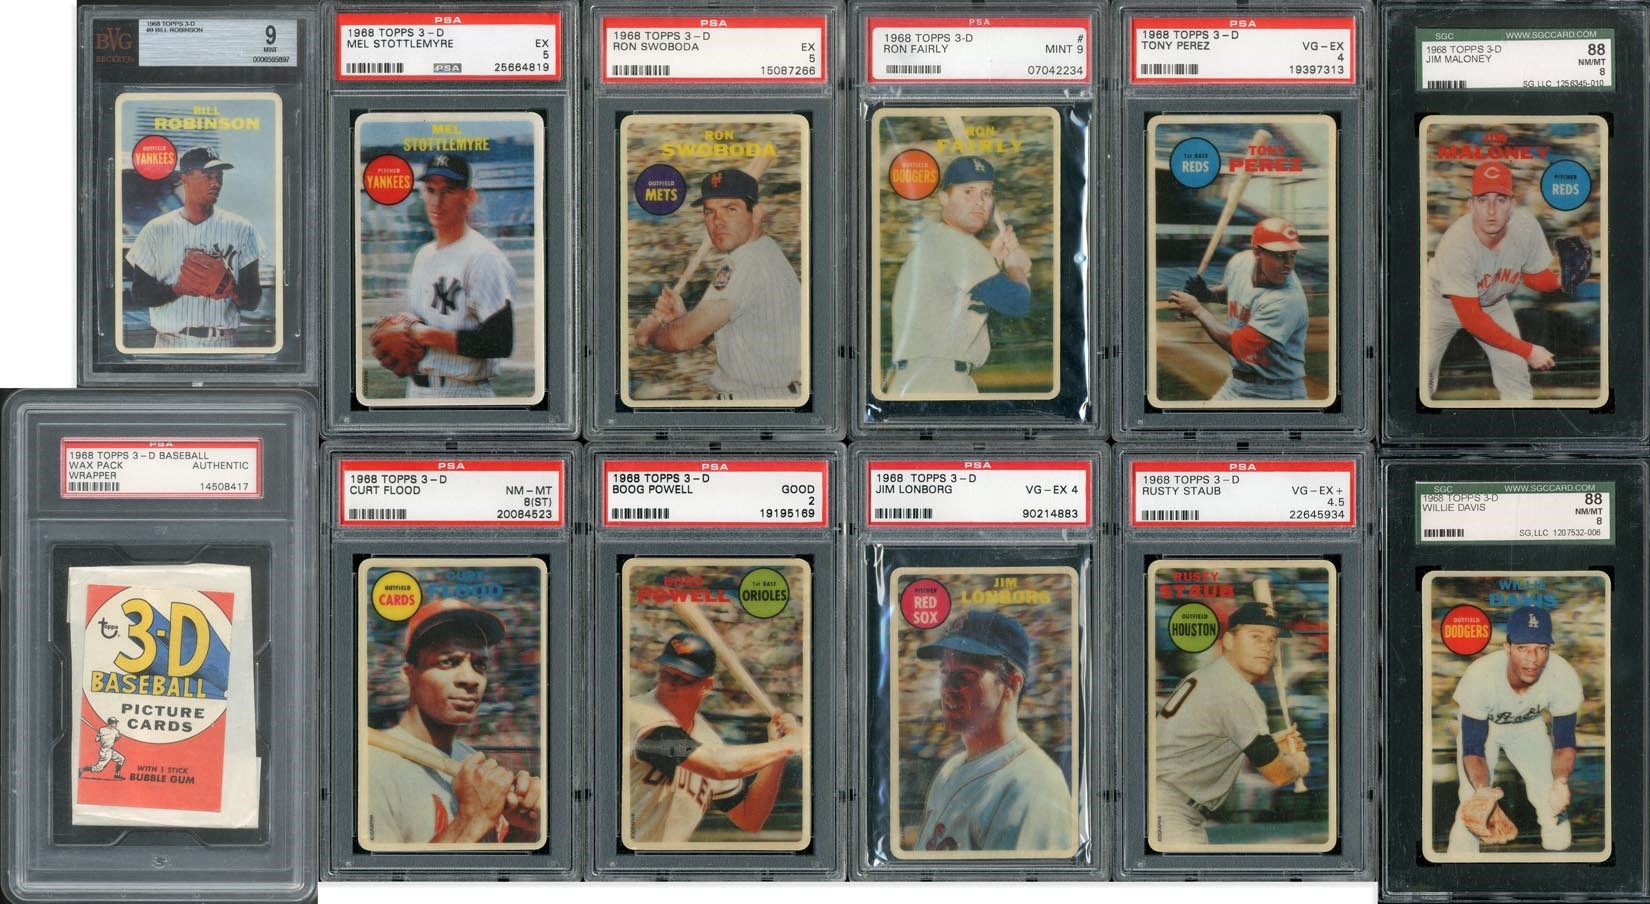 - 1968 Topps 3-D Near-Complete Graded Set Minus One with Wrapper